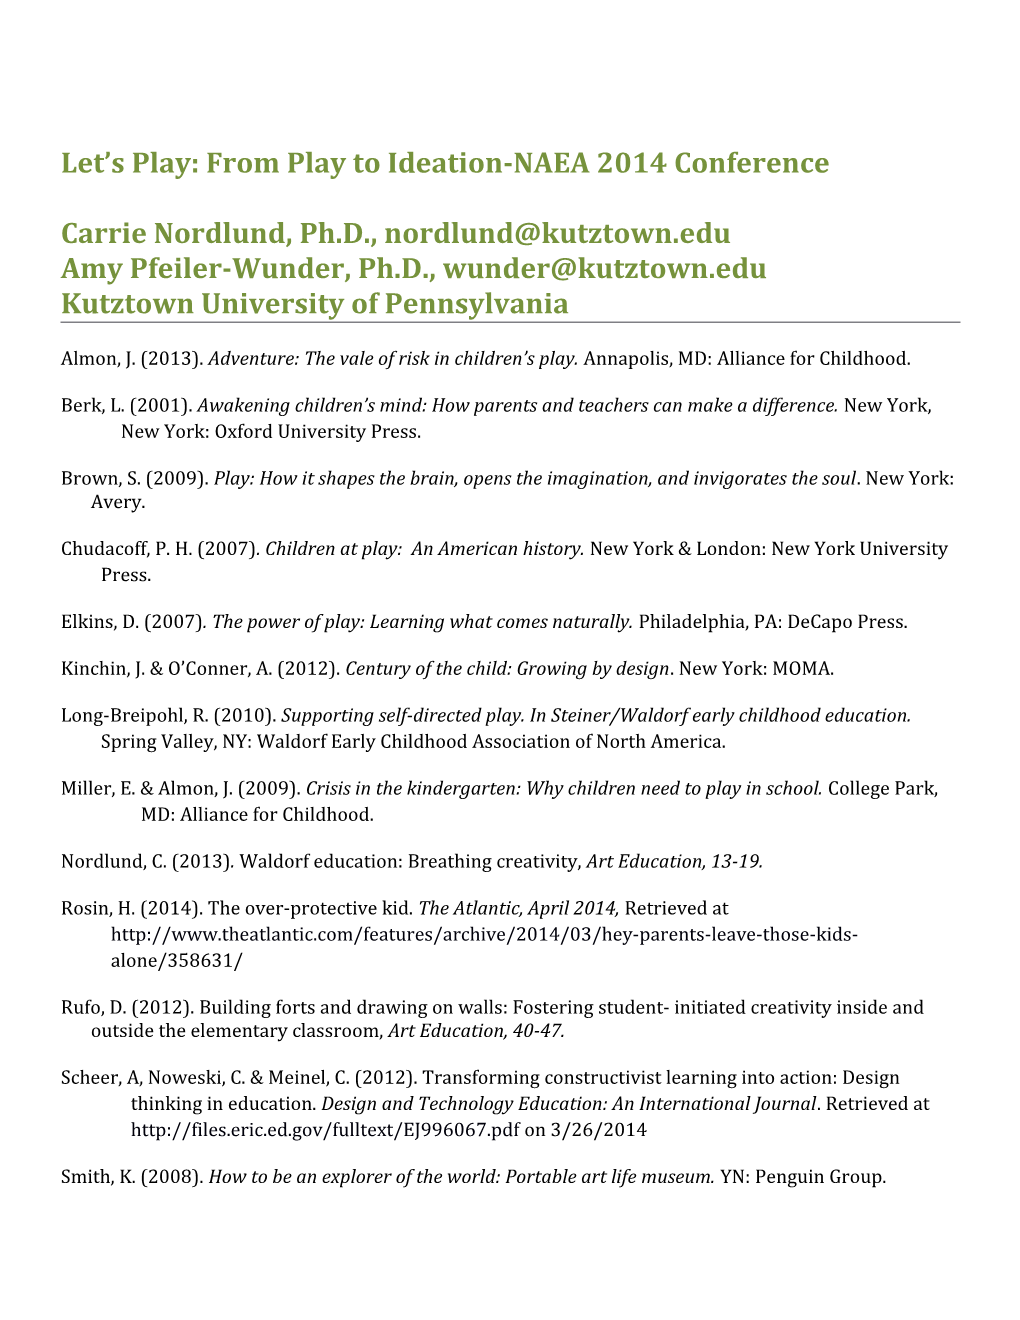 Let S Play: from Play to Ideation-NAEA 2014 Conference